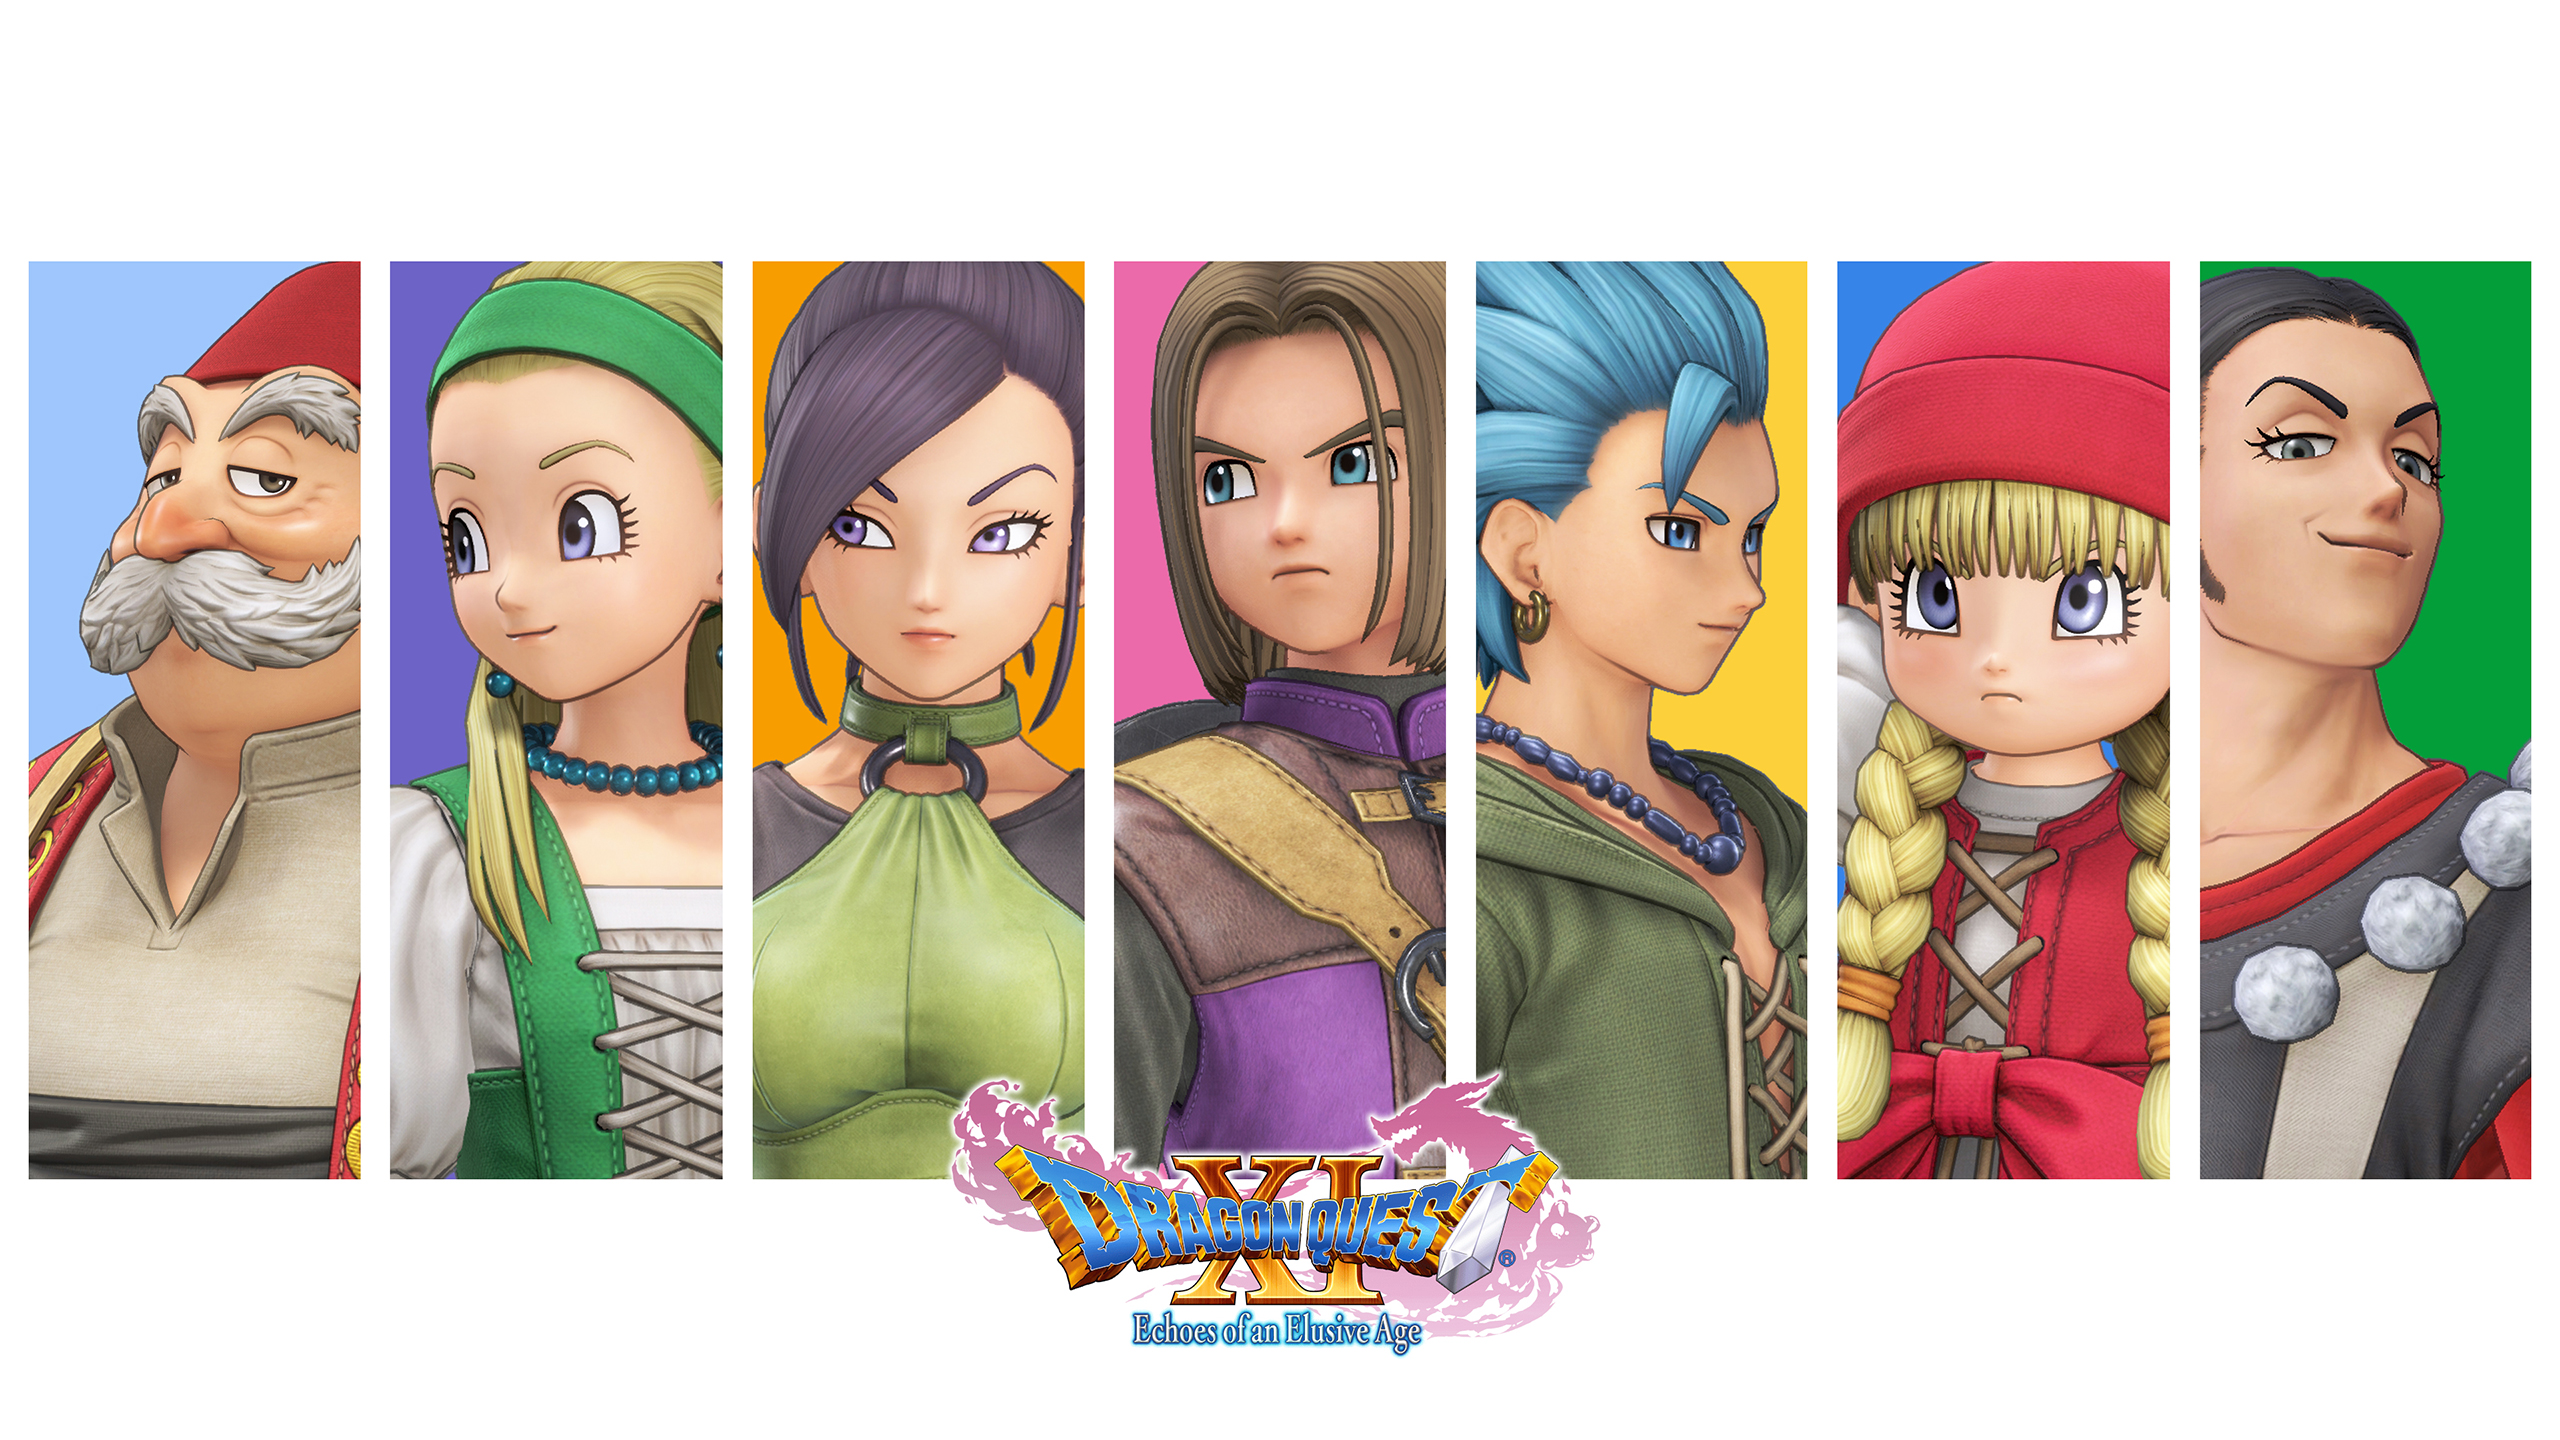 dq11-characters-04-2560 × 1440. dq11-characters-04-2560x1440 - Cat with Mon...